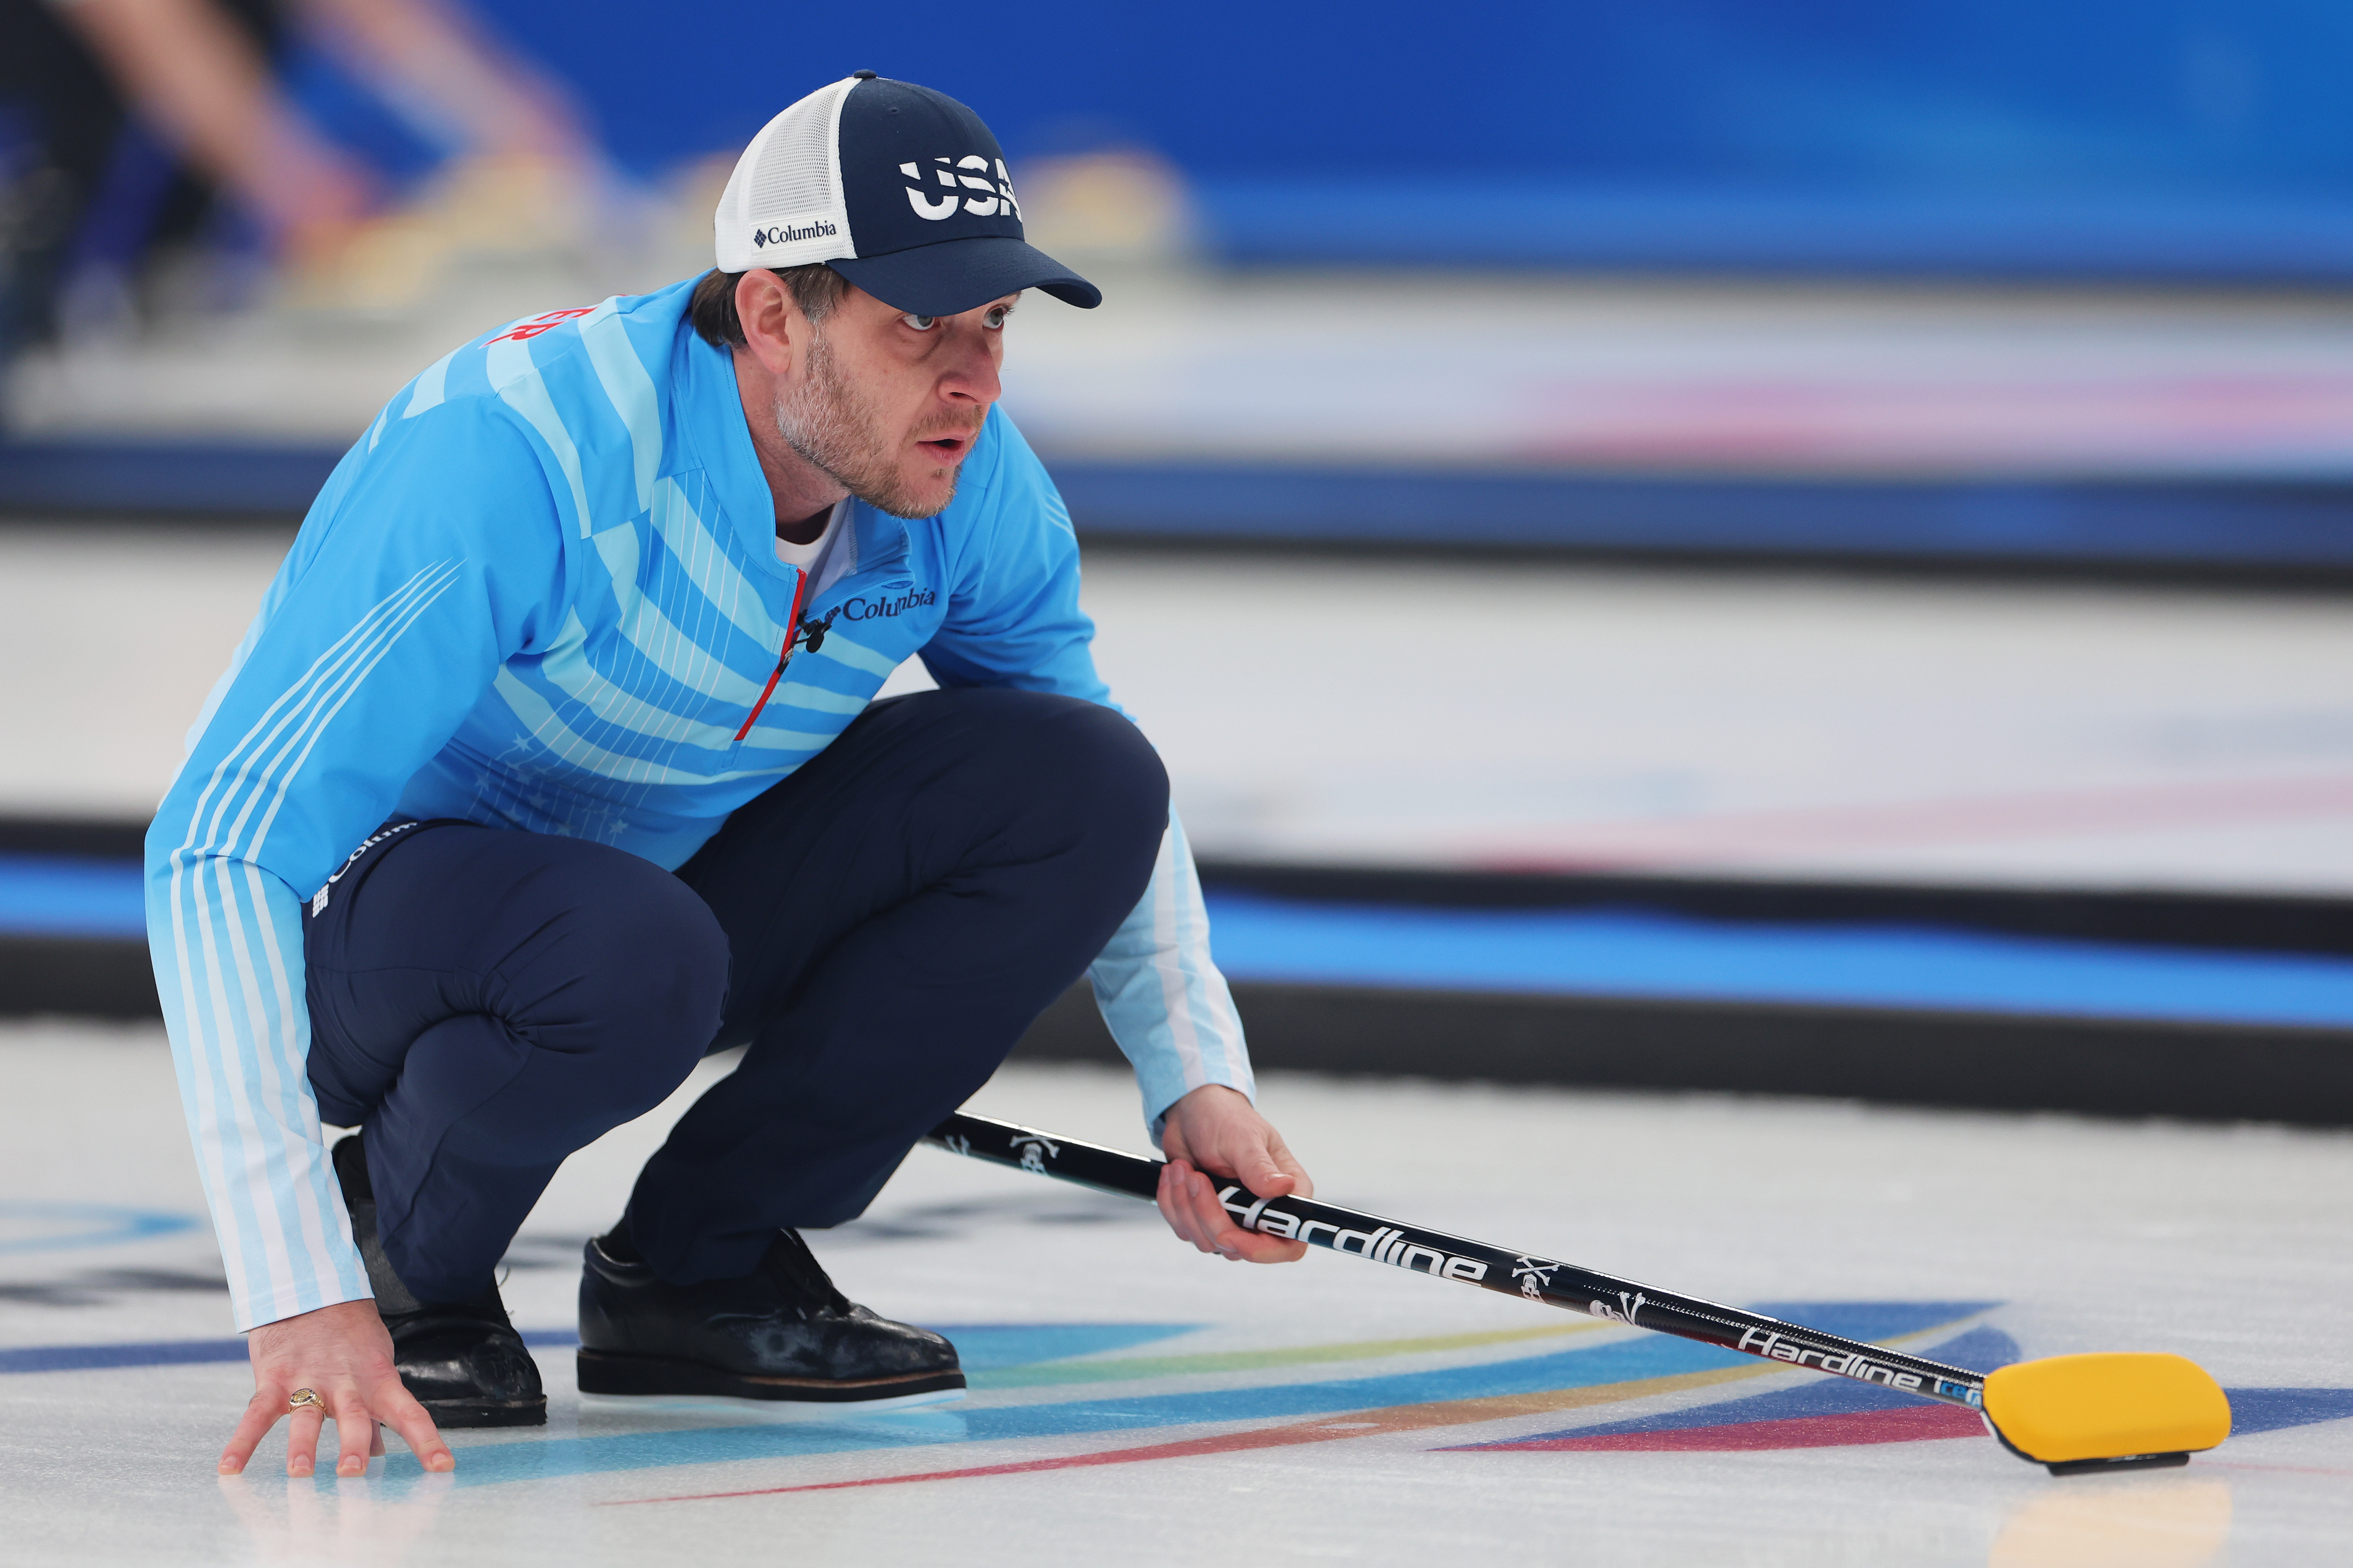 Team Shuster Stumbles in Upset Loss to Italy in Mens Curling